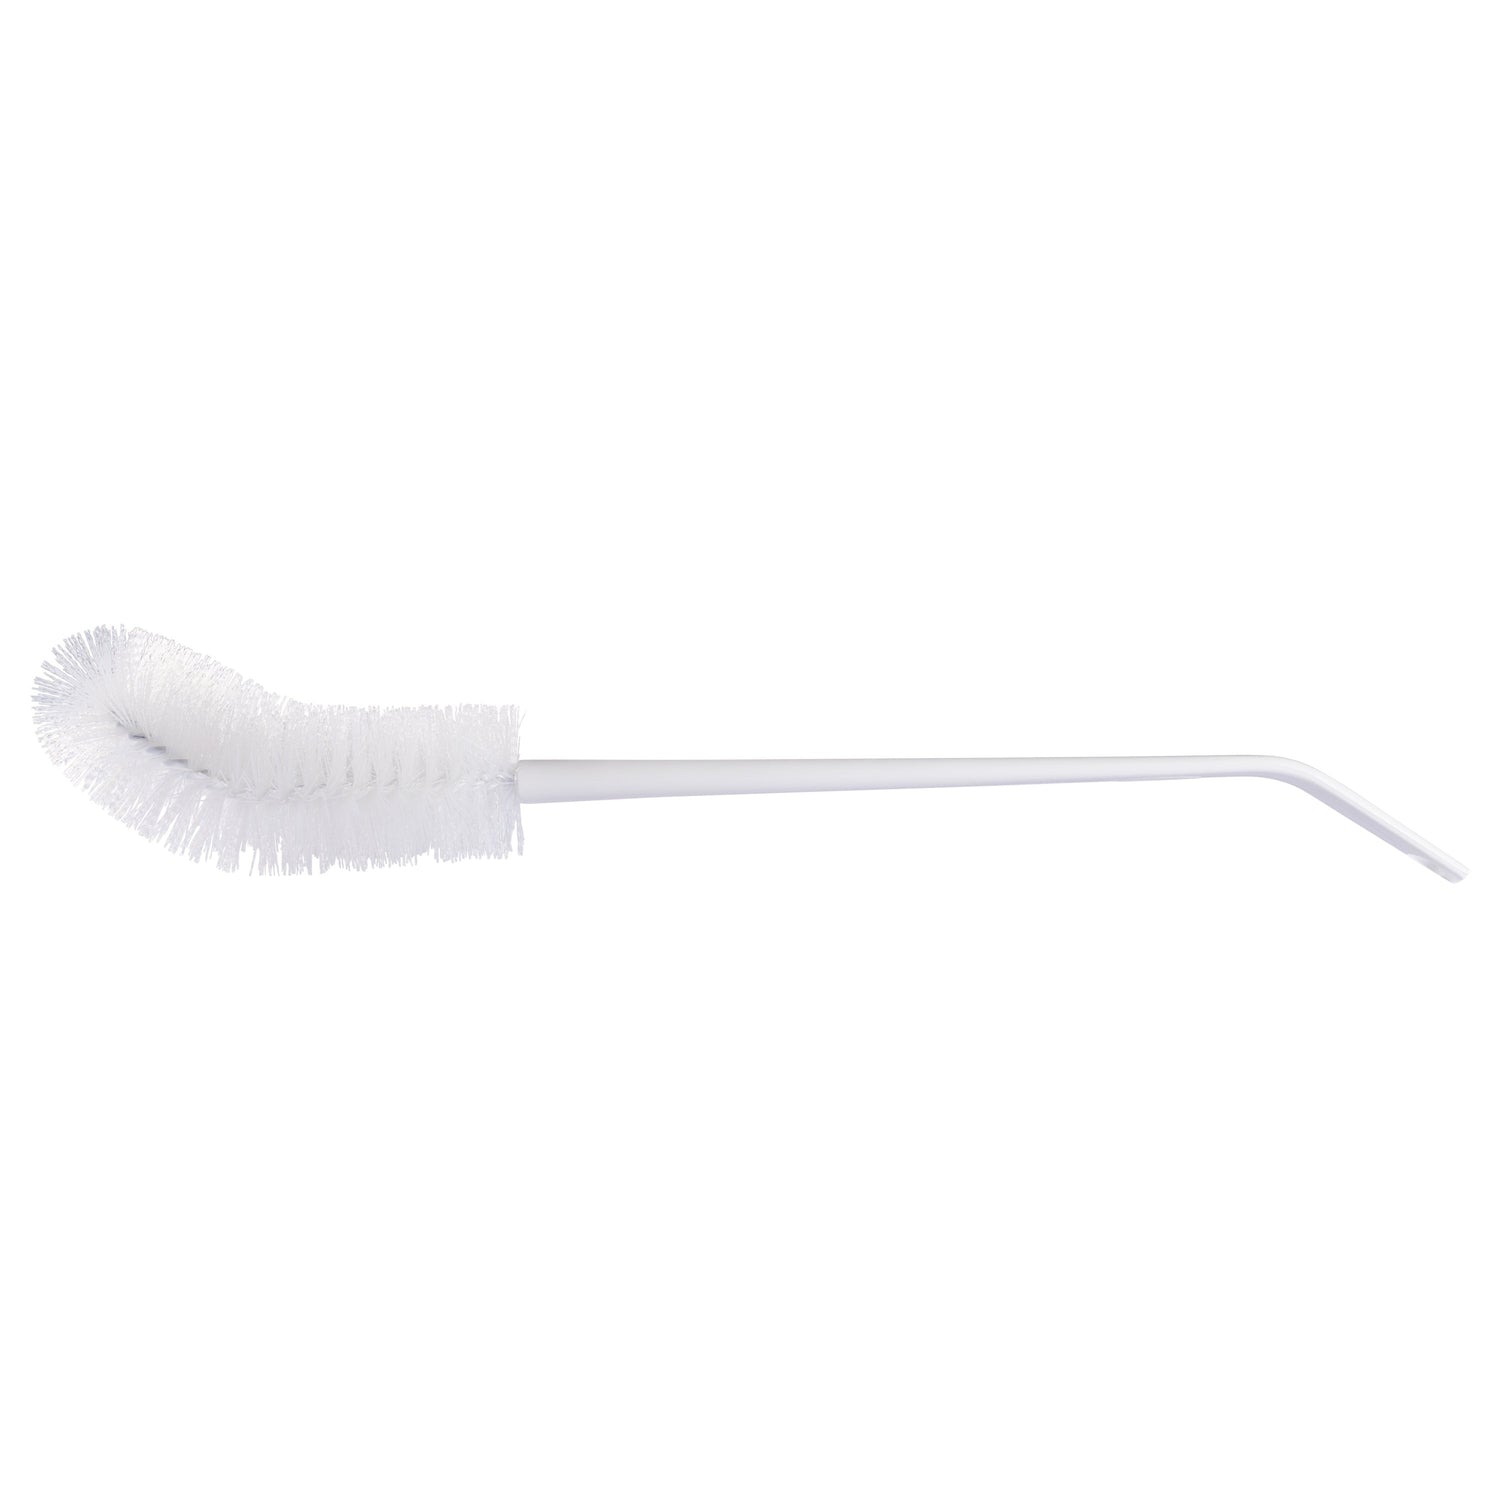 Bent-Tip Bowl Brush - Durable & Stiff Bristled Toilet Scrubber w/ Heavy Duty Handle-Cleaning Brushes-Fuller Brush Company